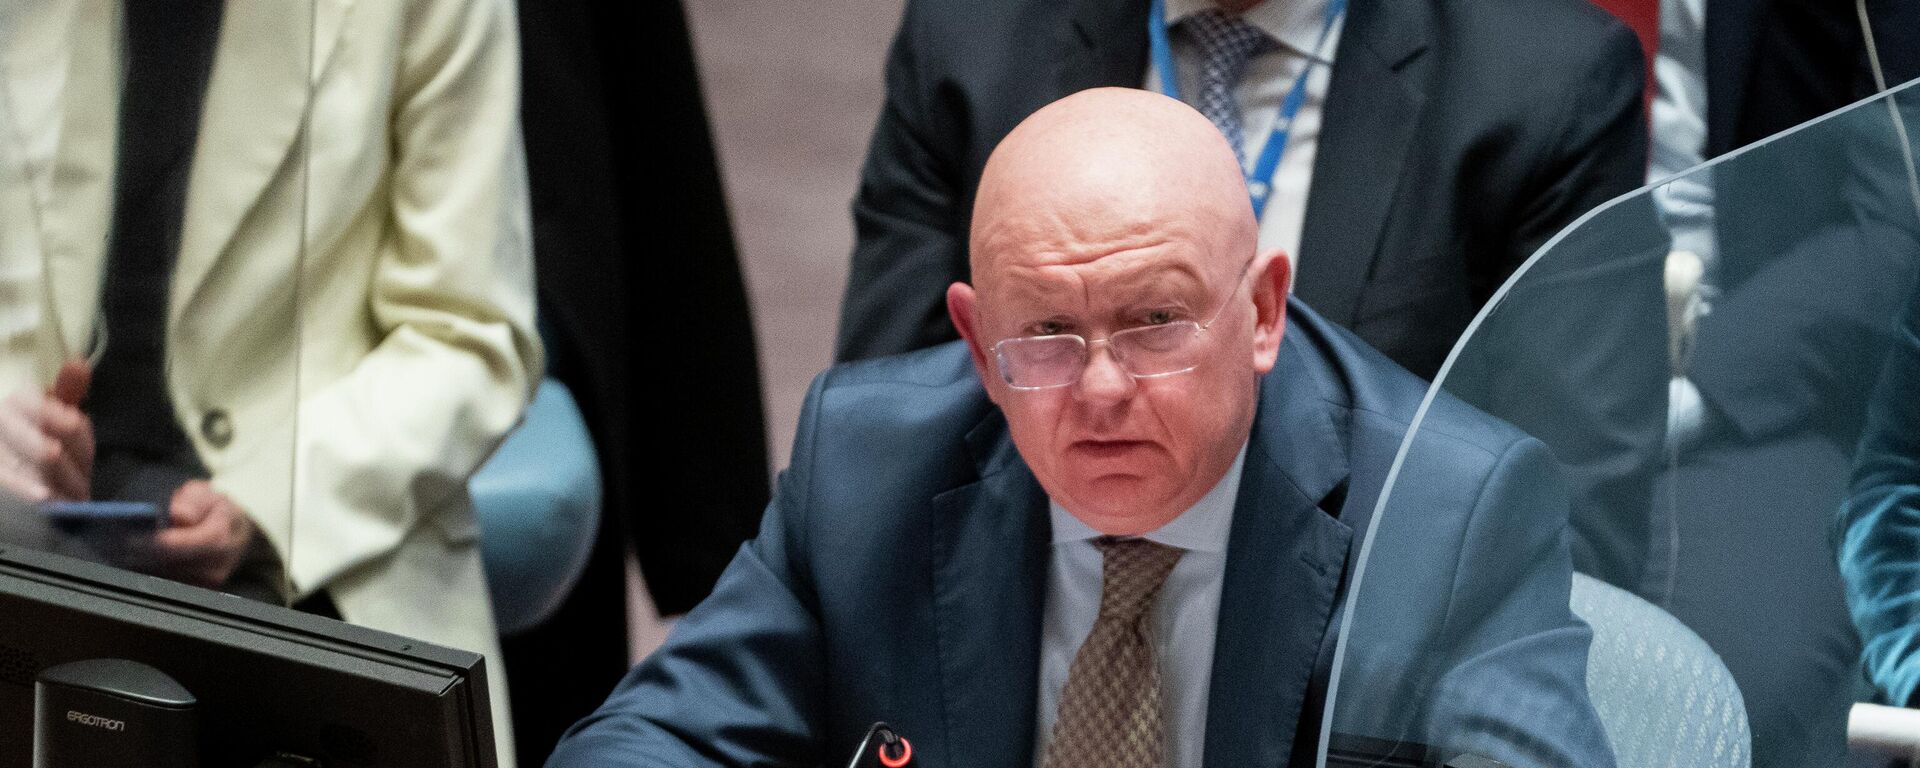 Vassily Nebenzia, permanent representative of Russia to the United Nations, speaks during a meeting of the UN Security Council, Tuesday, March 29, 2022, at United Nations headquarters. - Sputnik International, 1920, 13.05.2022